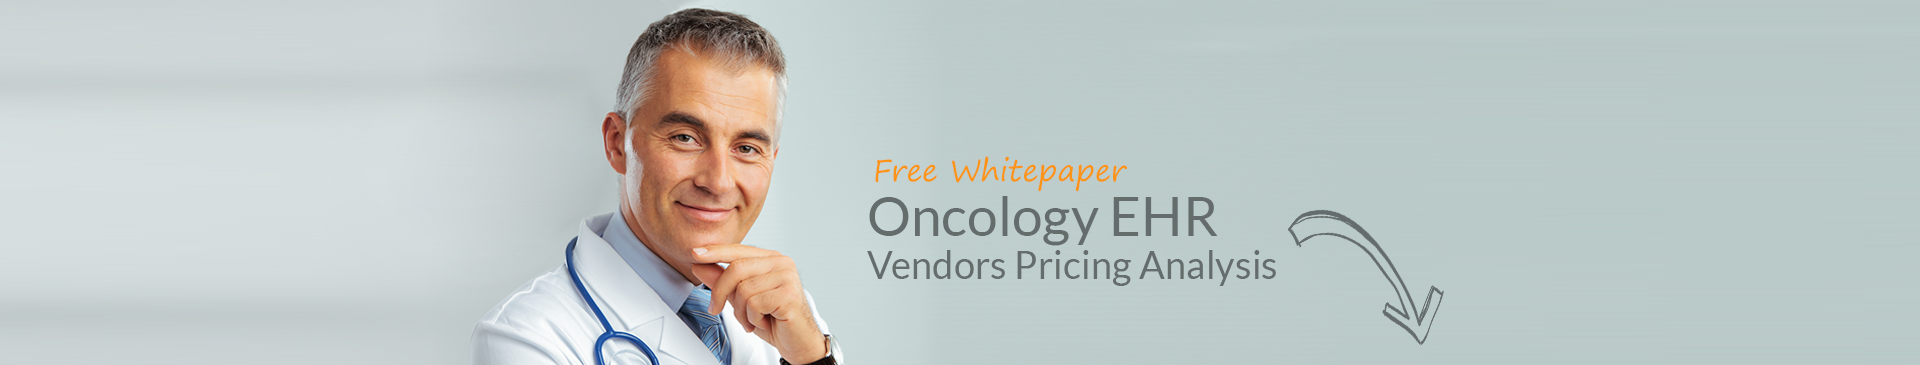 Oncology EHR Vendors pricing analysis